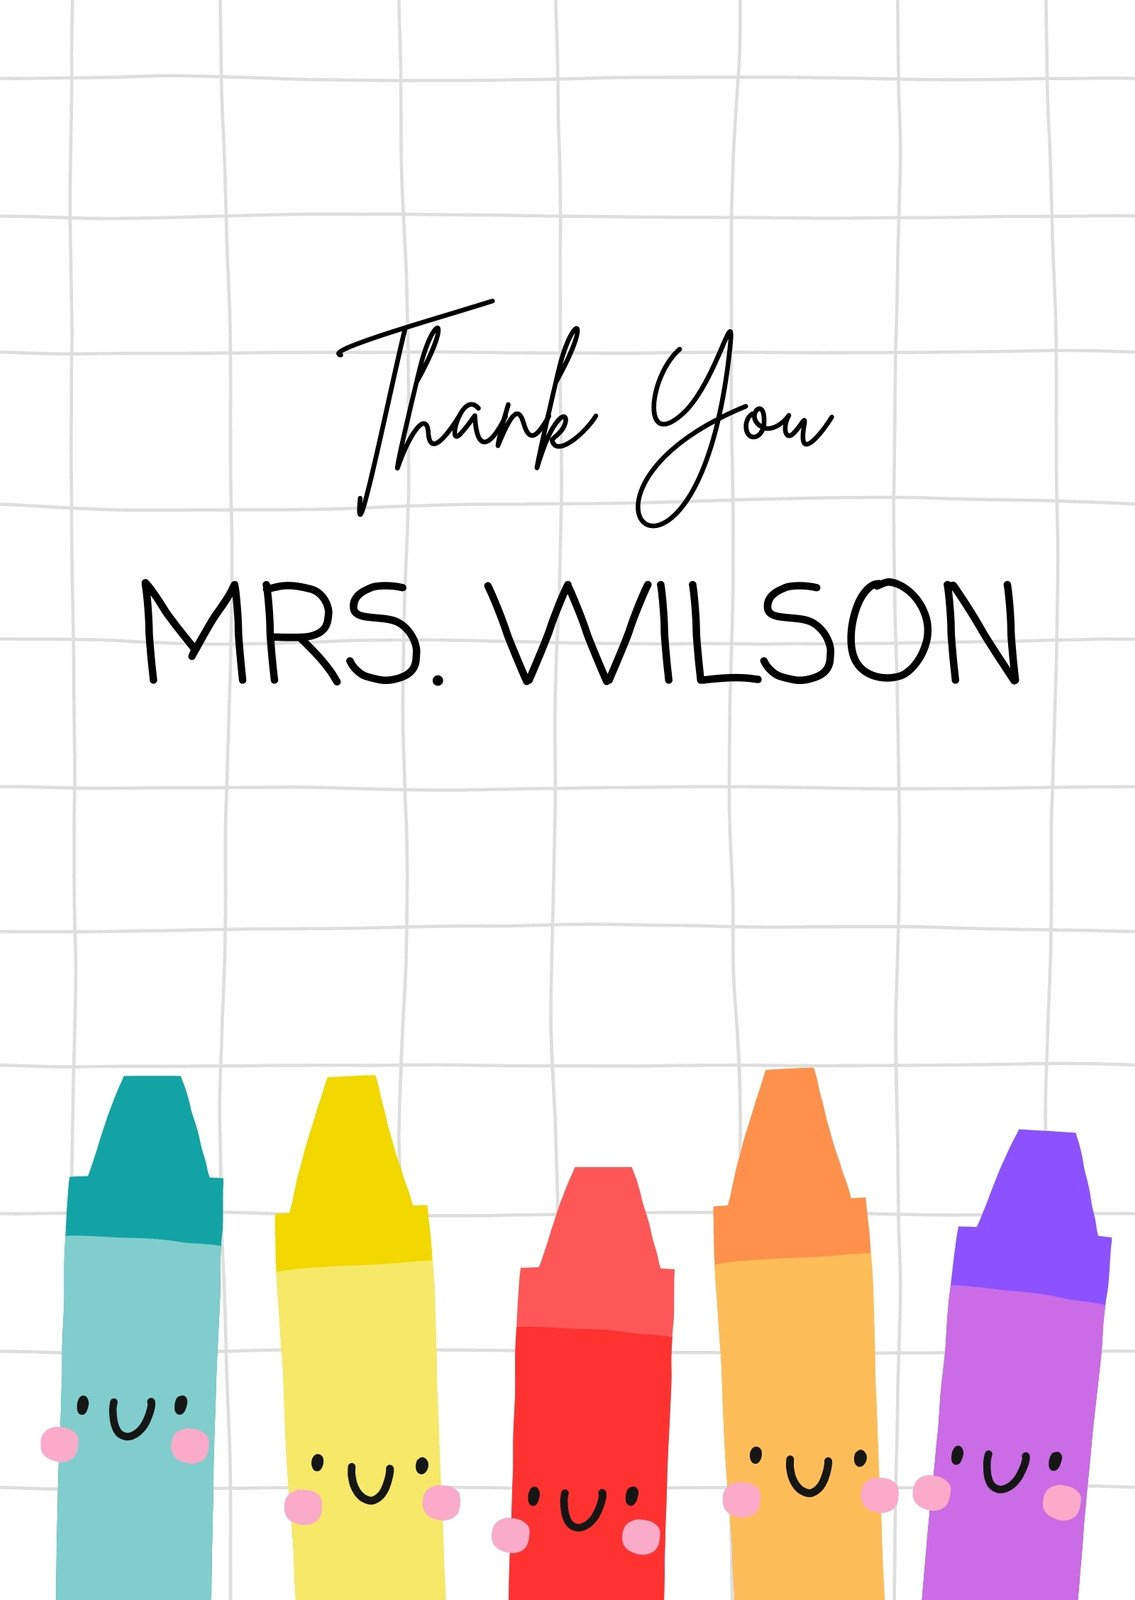 Free Custom Printable Teacher Thank You Card Templates | Canva for Free Personalized Thank You Cards Printable